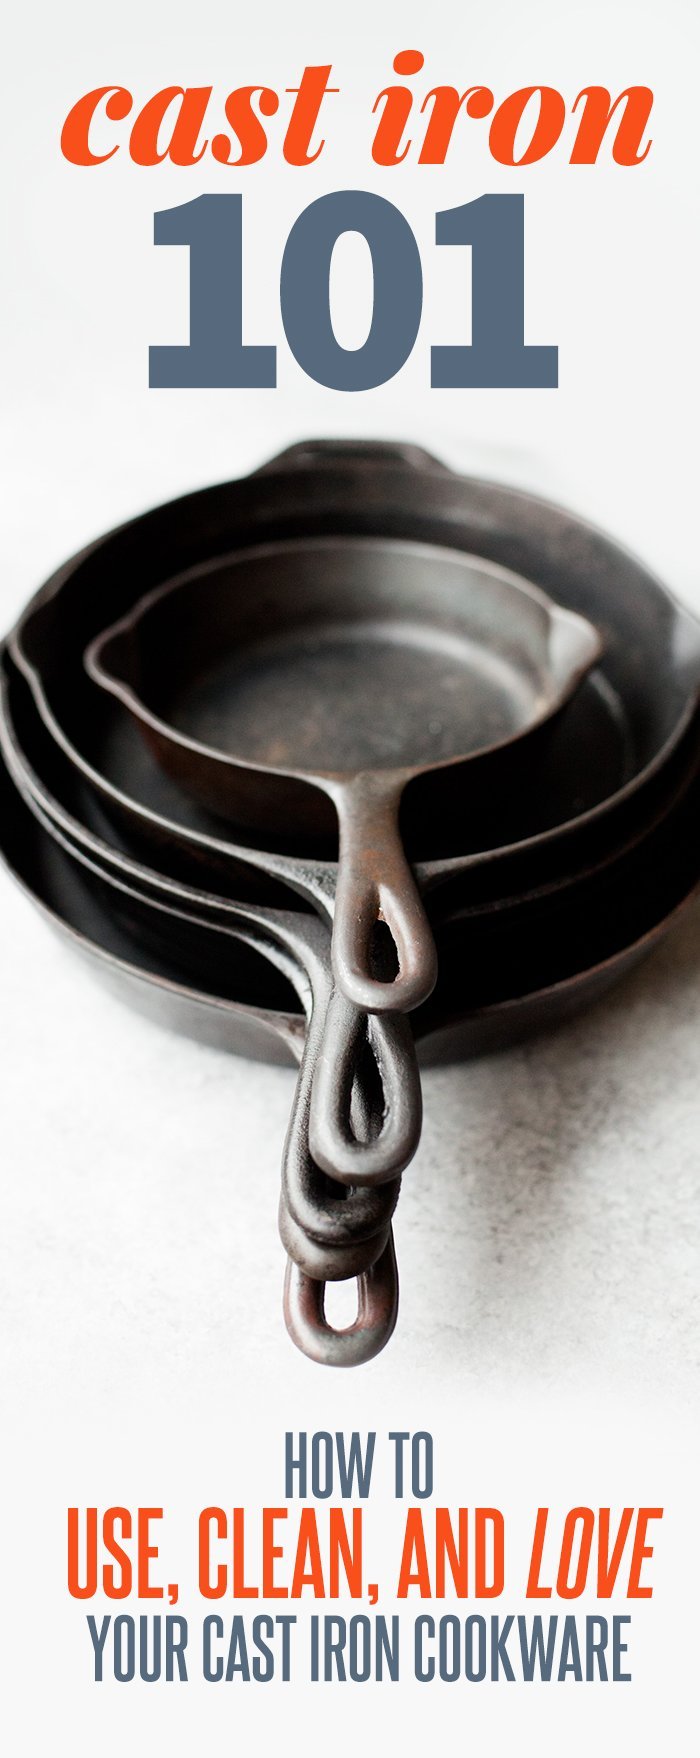 How to Use, Clean, and Love Cast Iron Cookware